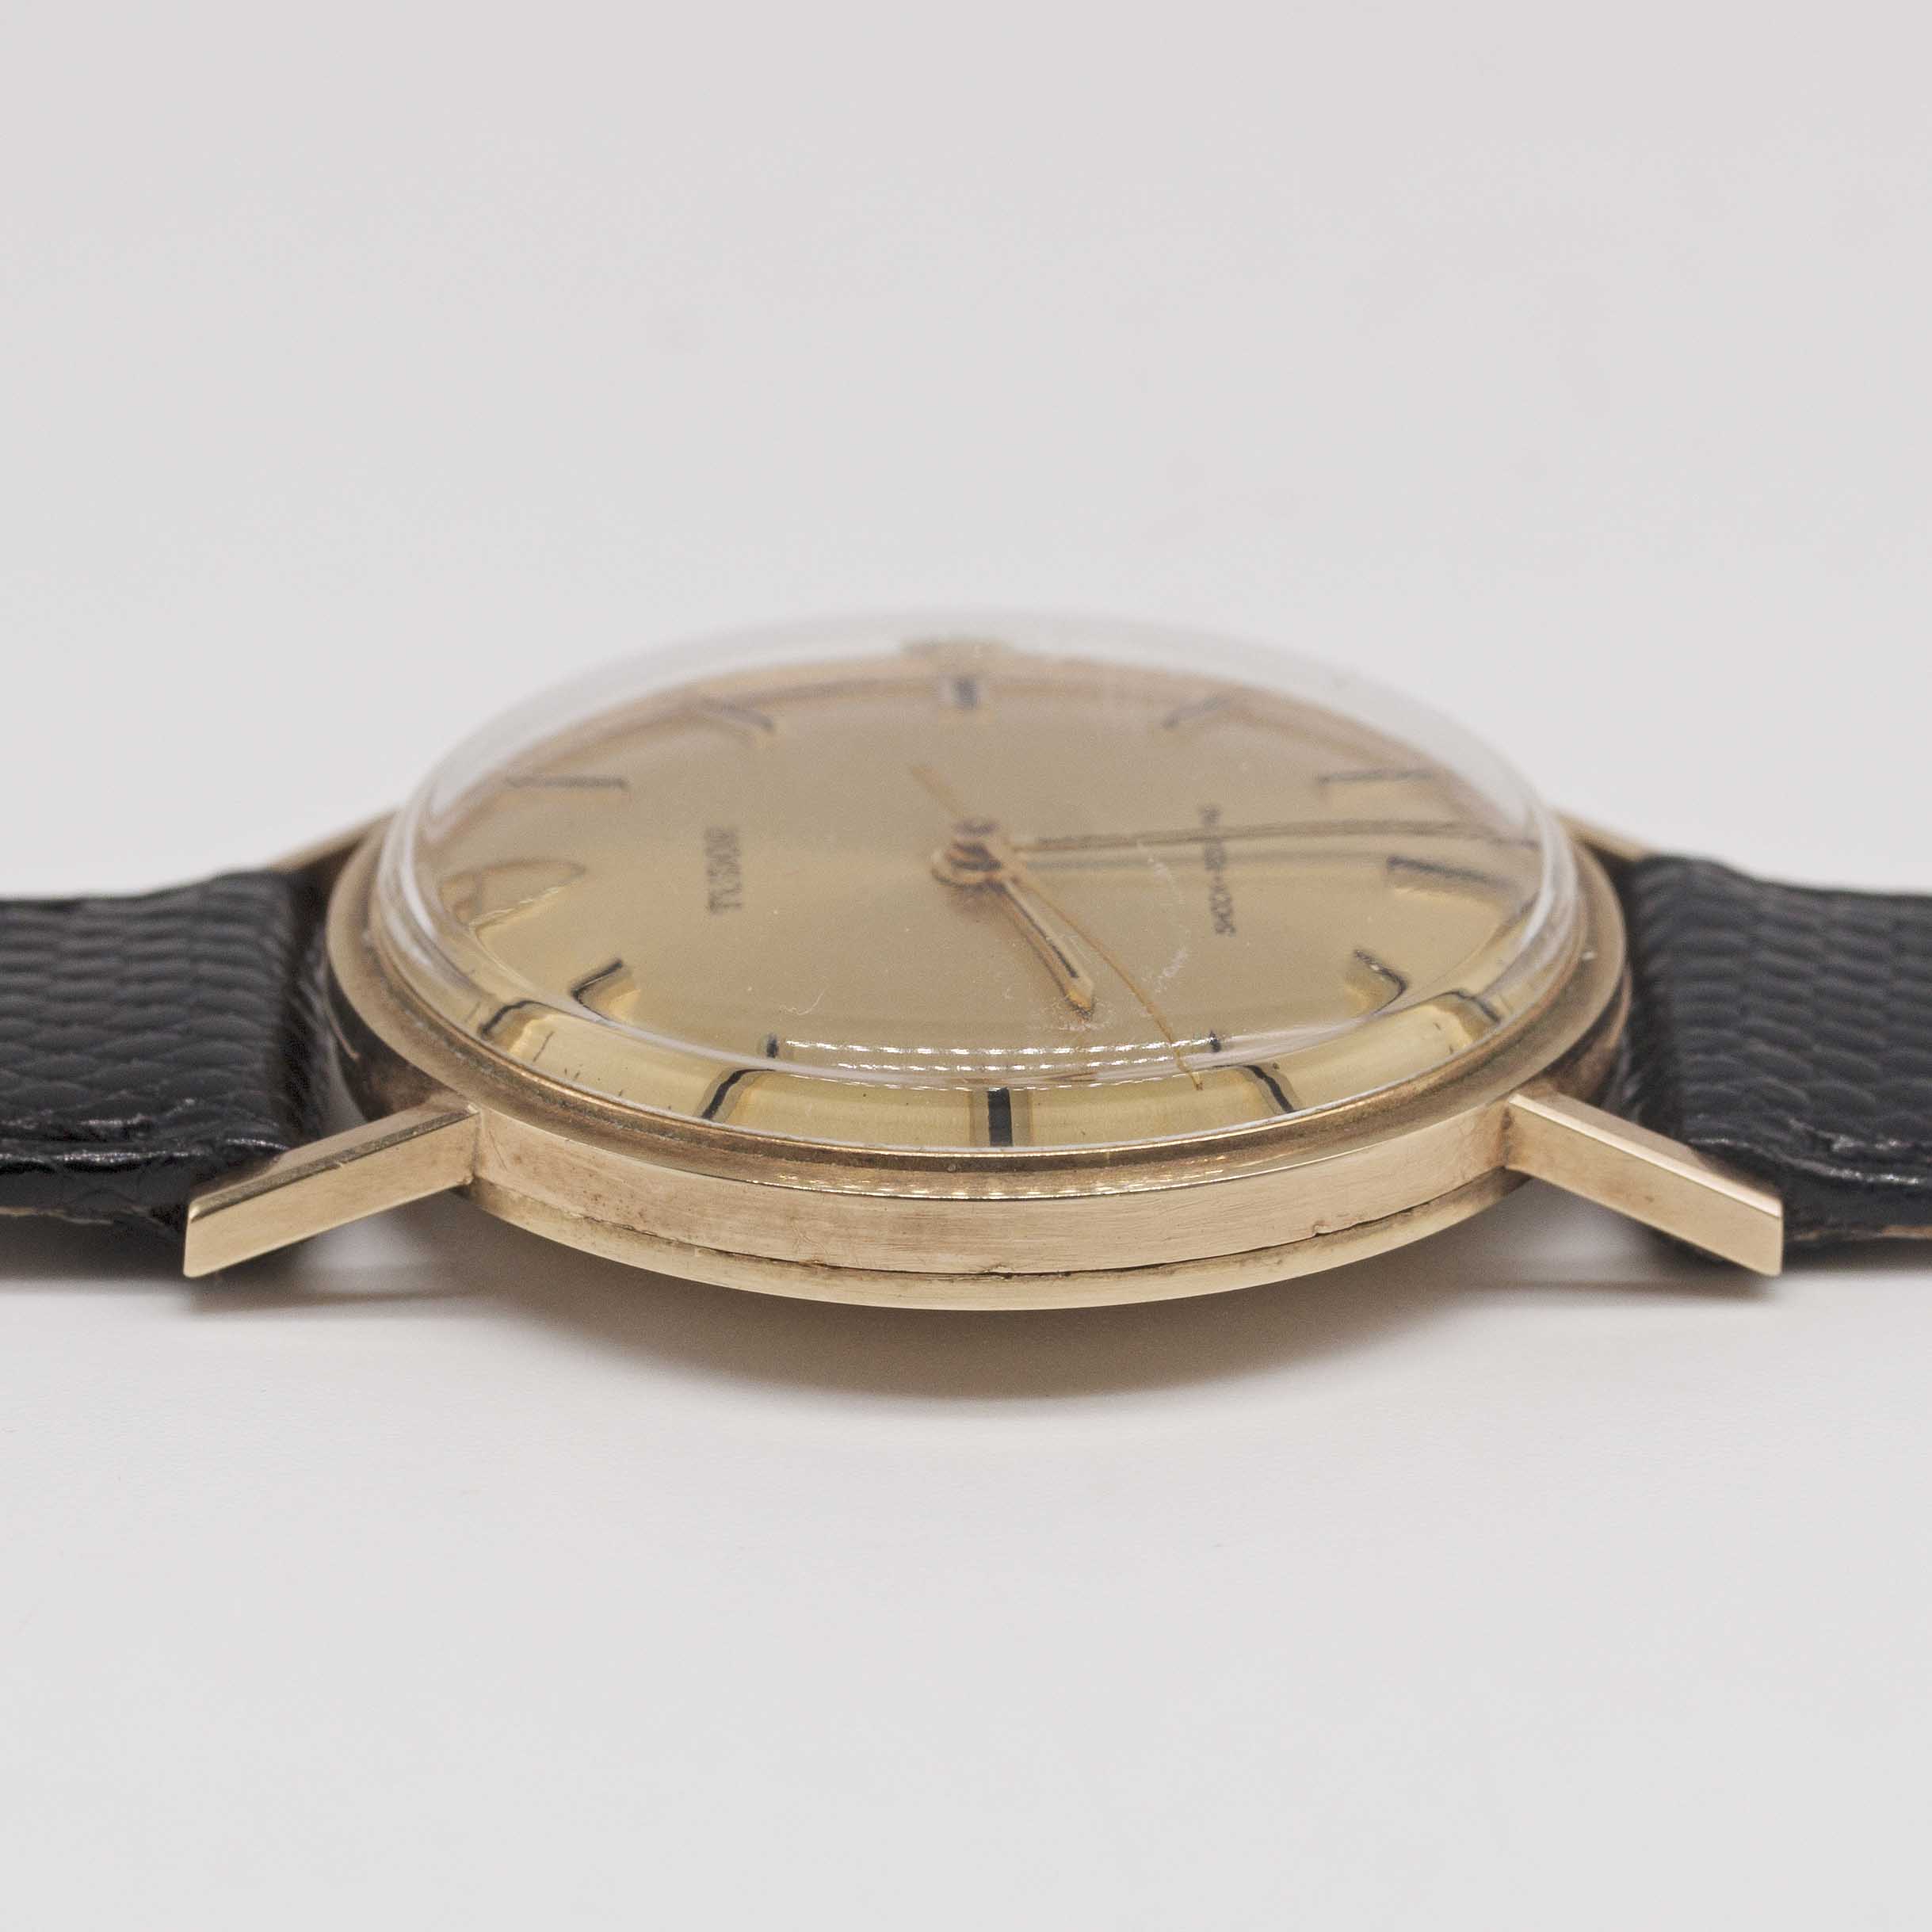 A GENTLEMAN'S 9CT SOLID GOLD ROLEX TUDOR SHOCK RESISTING WRIST WATCH CIRCA 1969, WITH CHAMPAGNE - Image 8 of 10